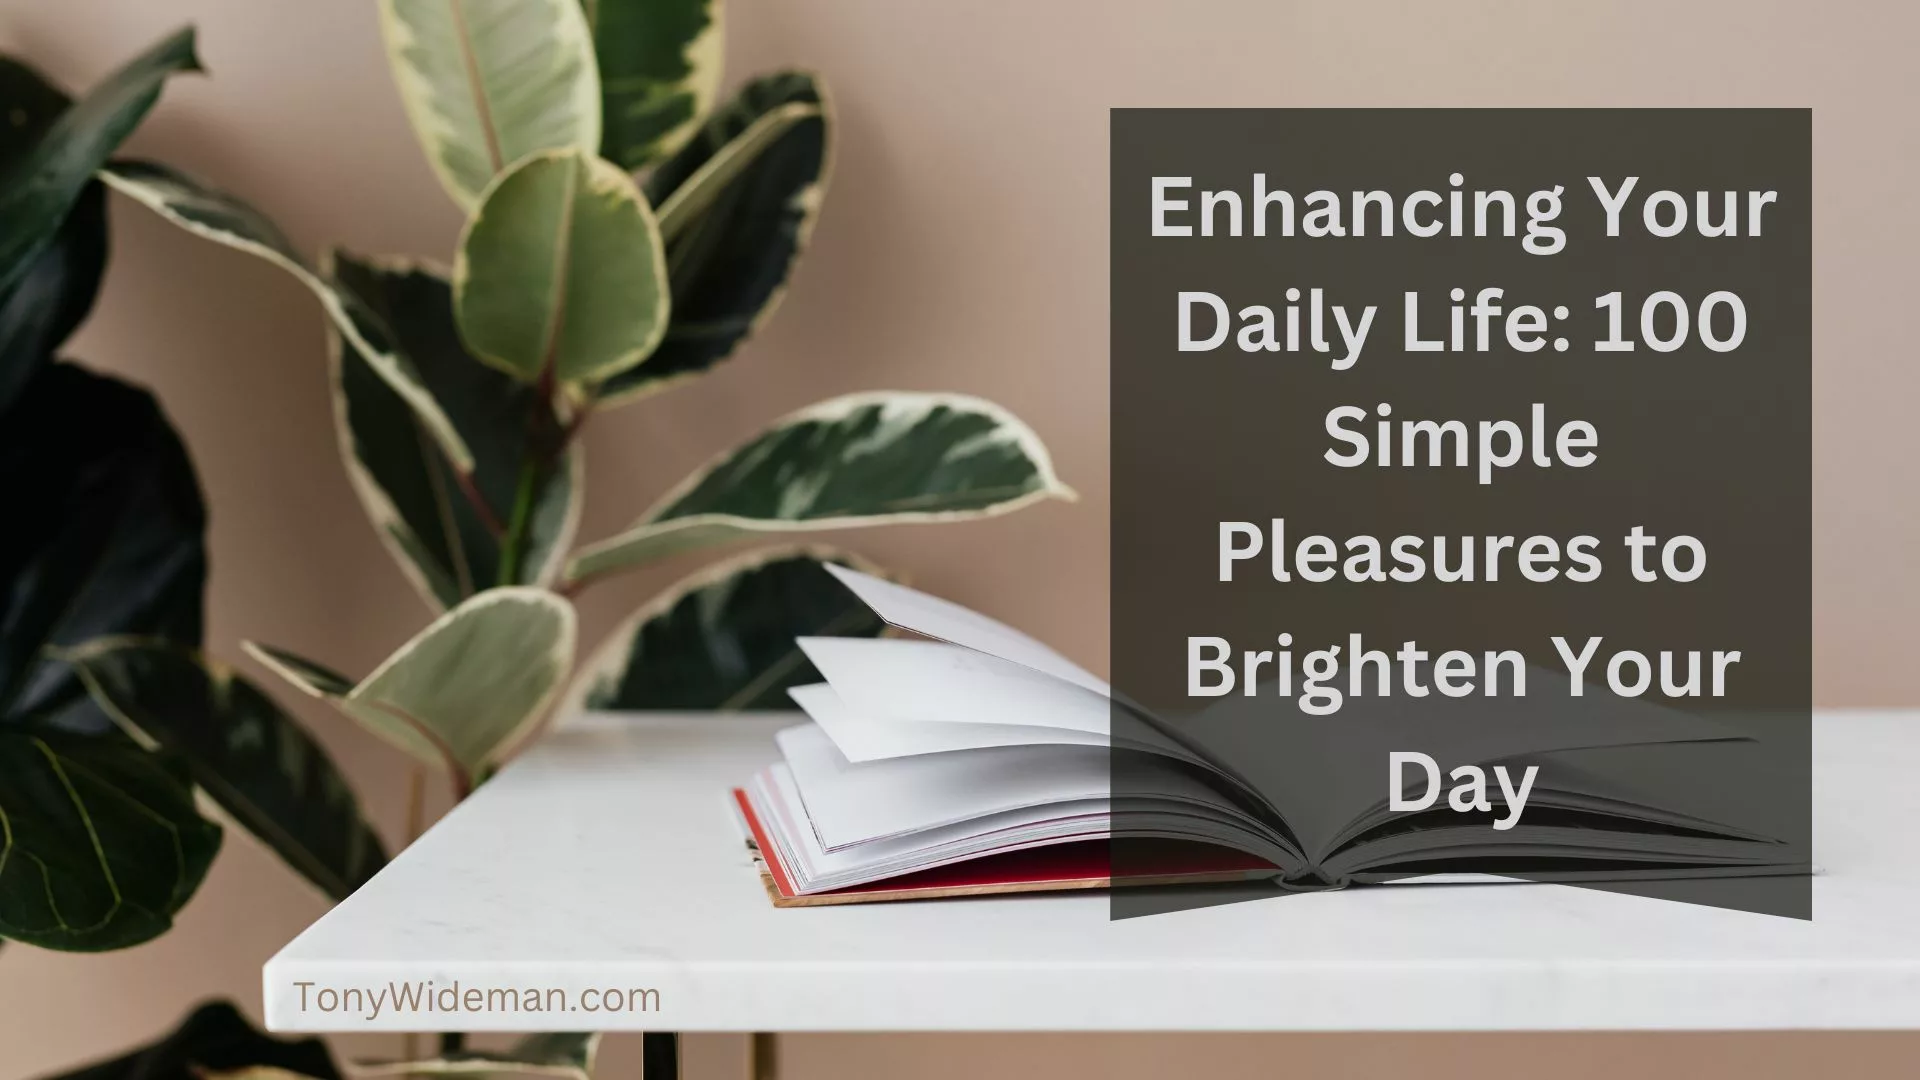 Enhancing-Your-Daily-Life-100-Simple-Pleasures-to-Brighten-Your-Day